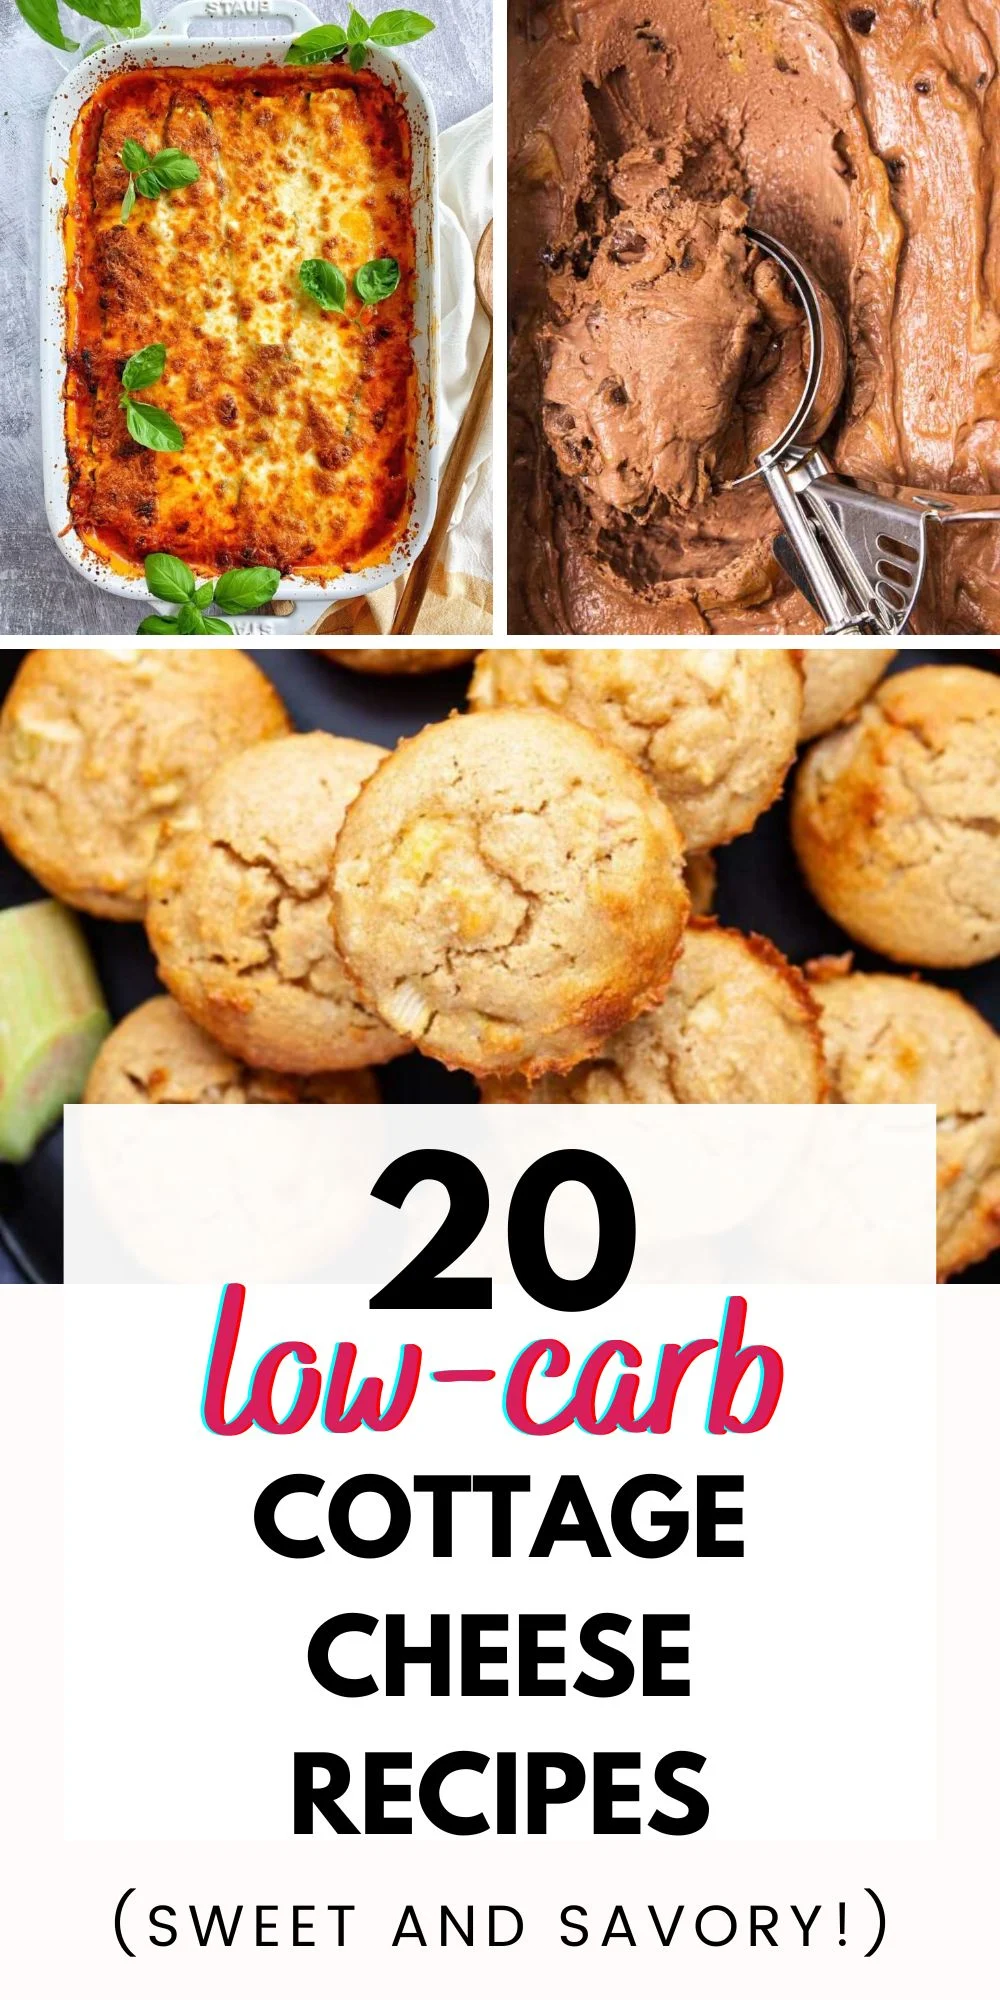 Pinterest image with text: 20 low-carb cottage cheese recipes - sweet and savory!